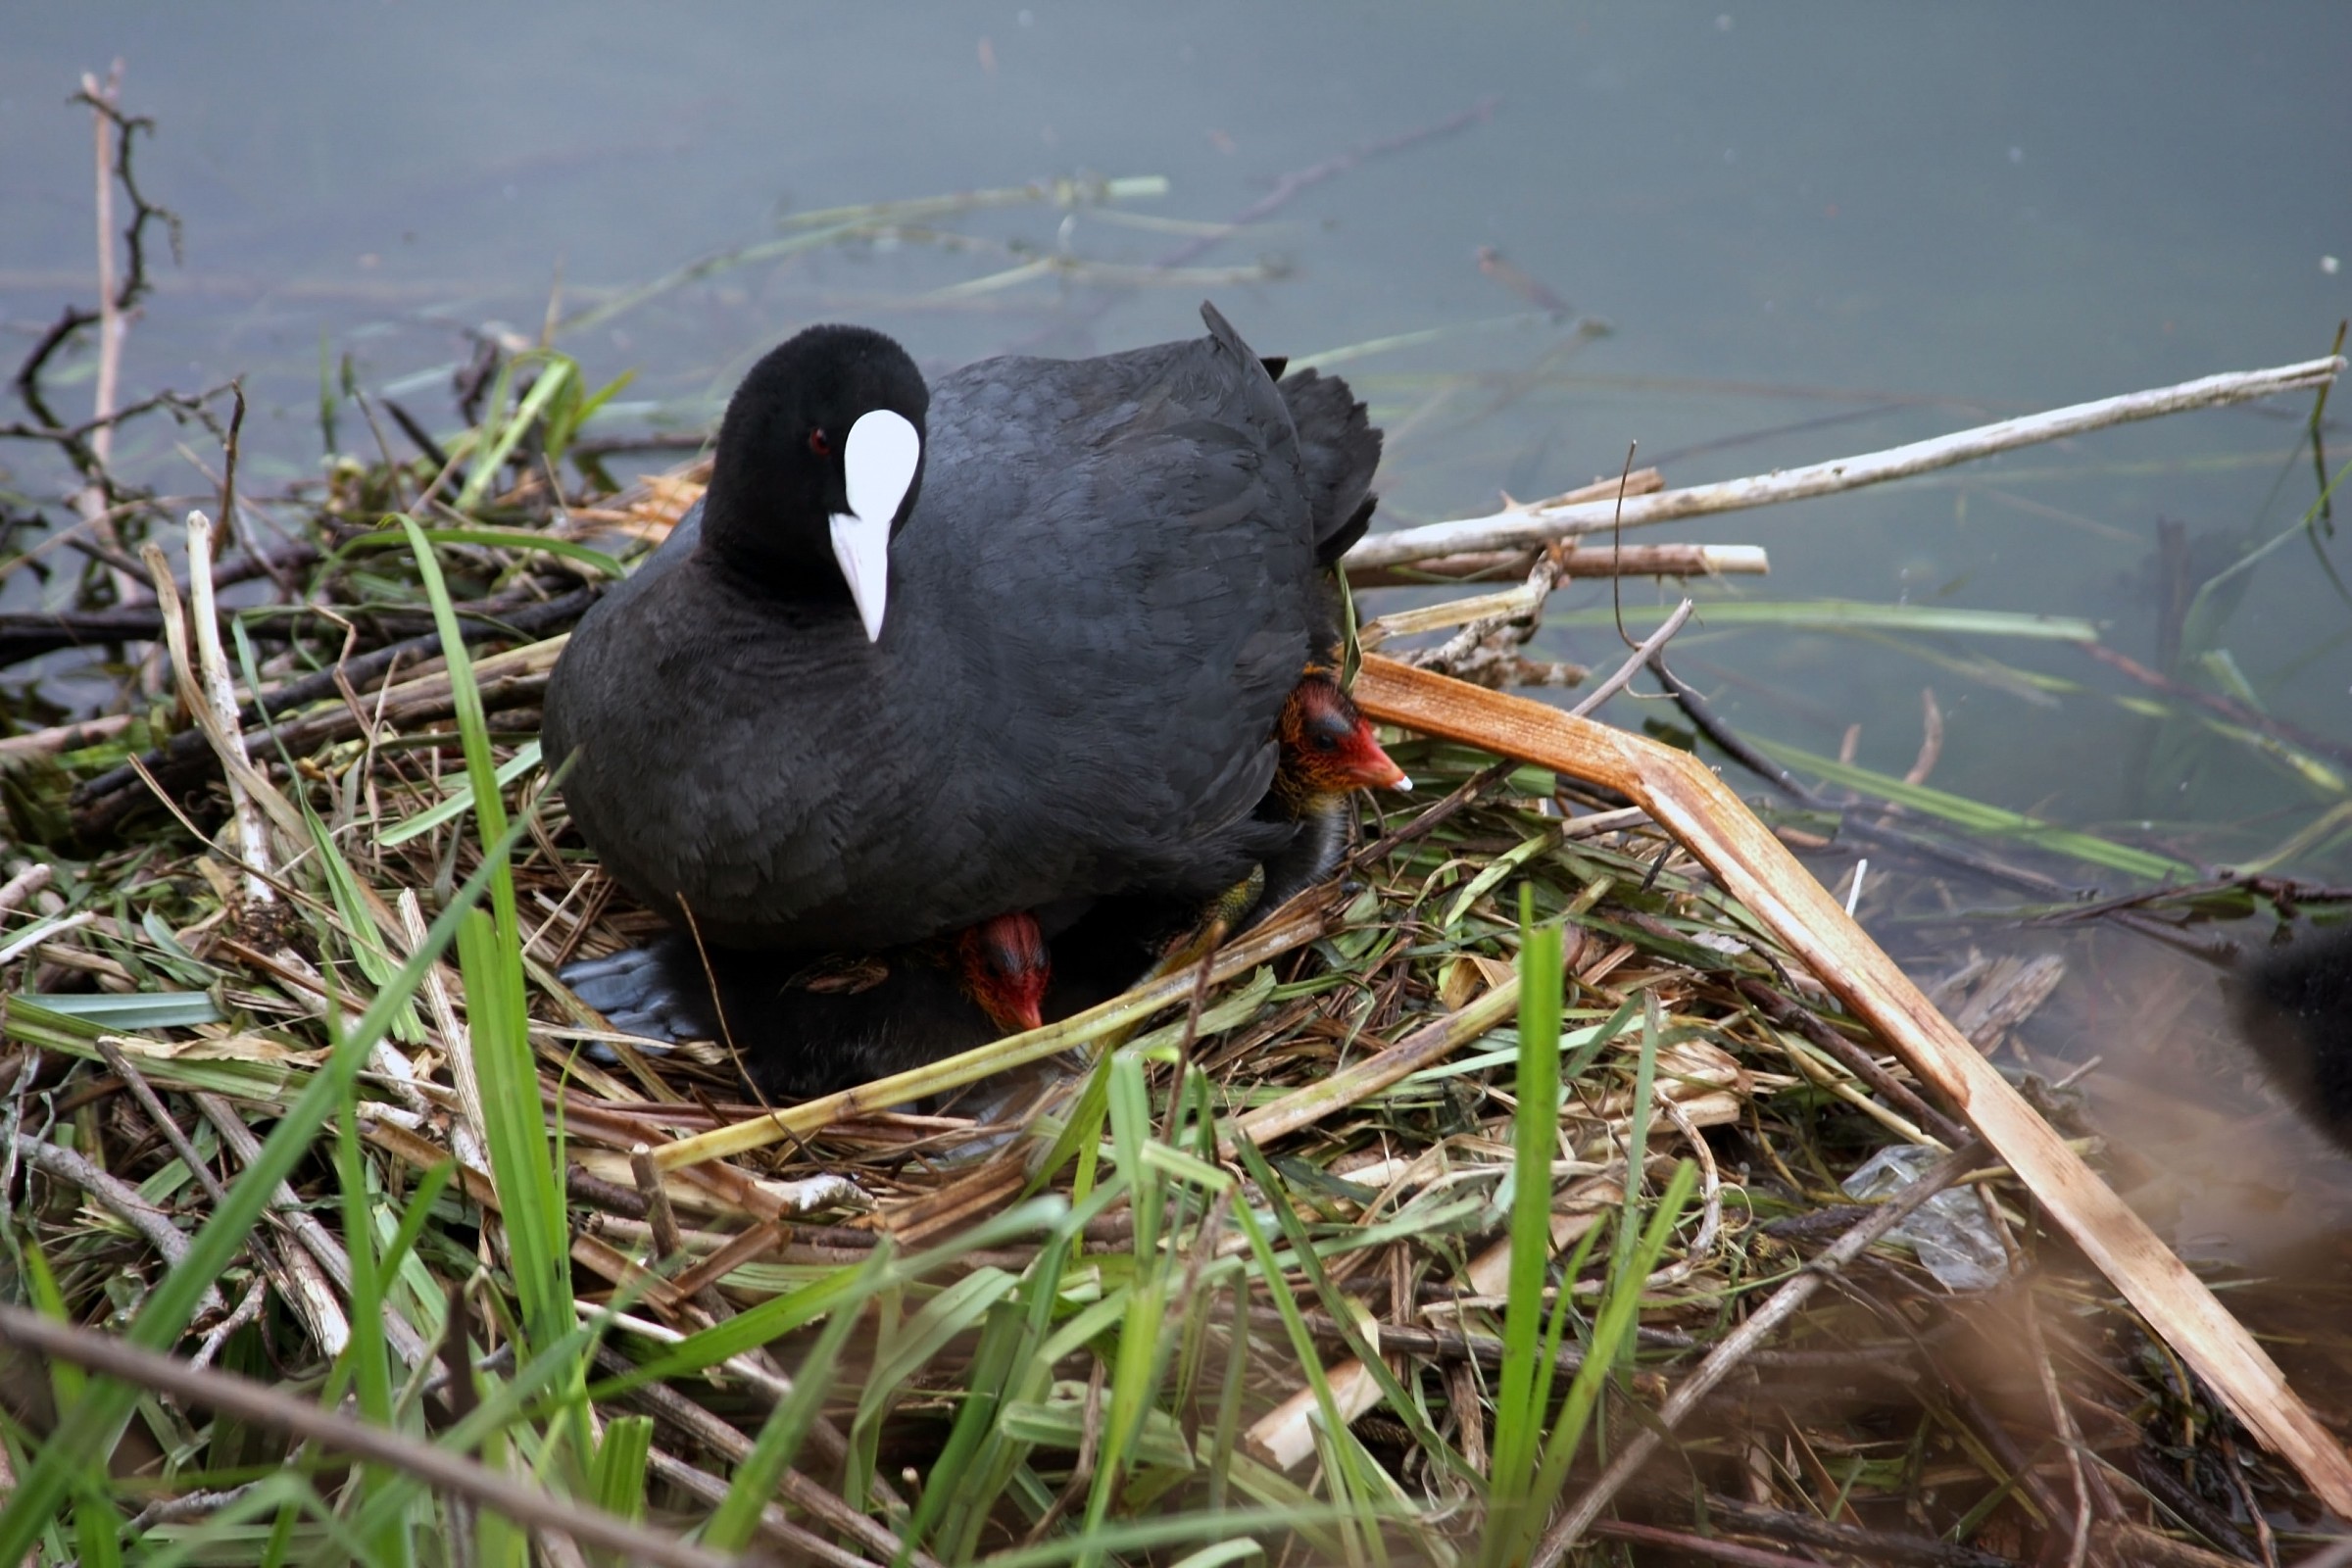 Coot in the nest with her babies...